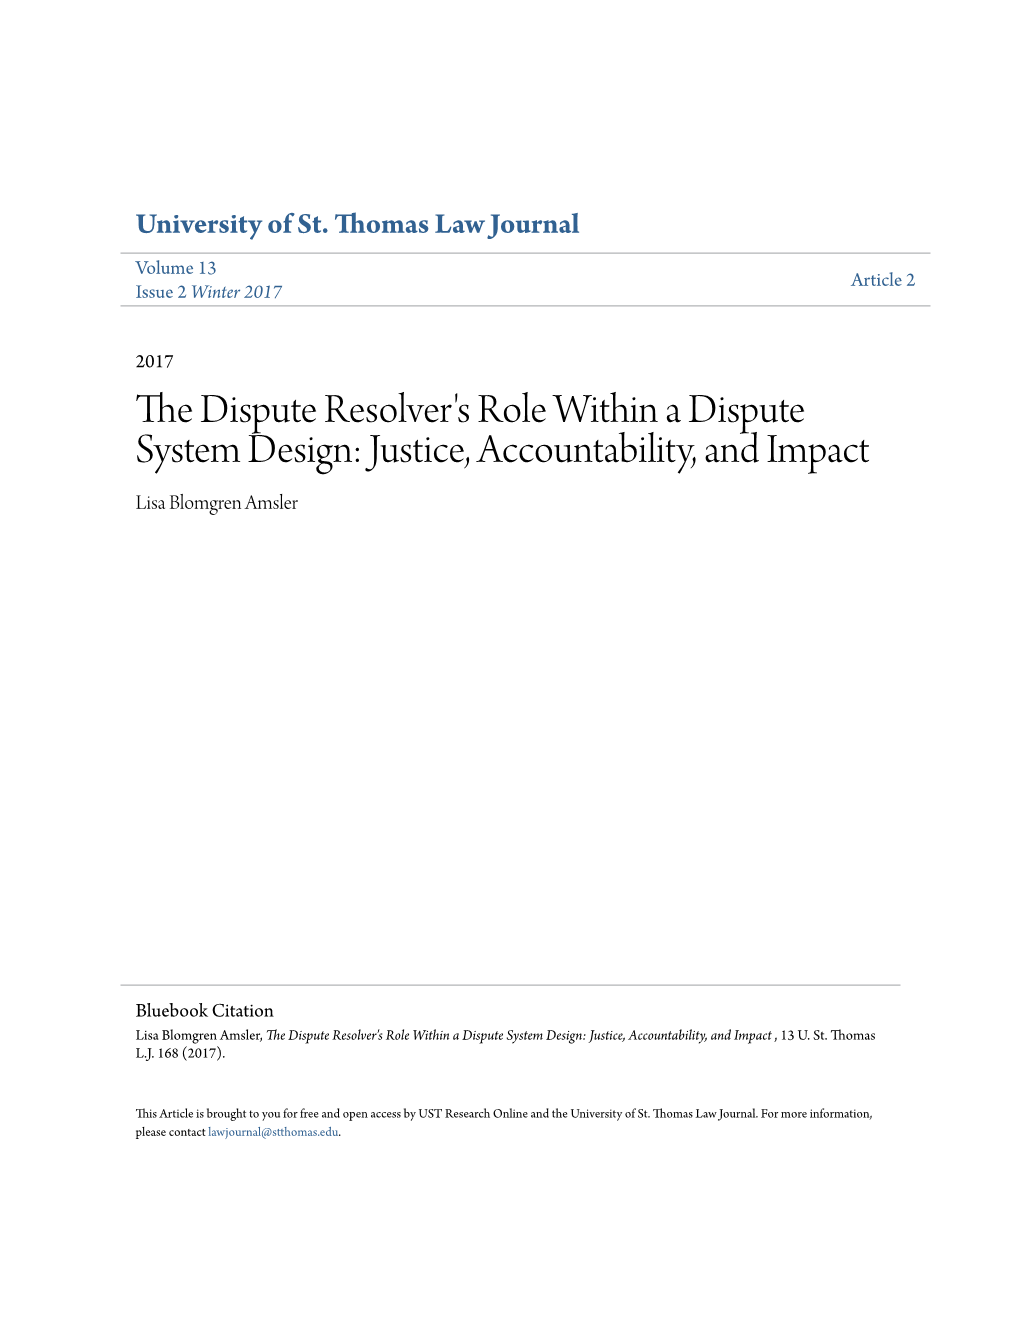 The Dispute Resolver's Role Within a Dispute System Design: Justice, Accountability, and Impact Lisa Blomgren Amsler